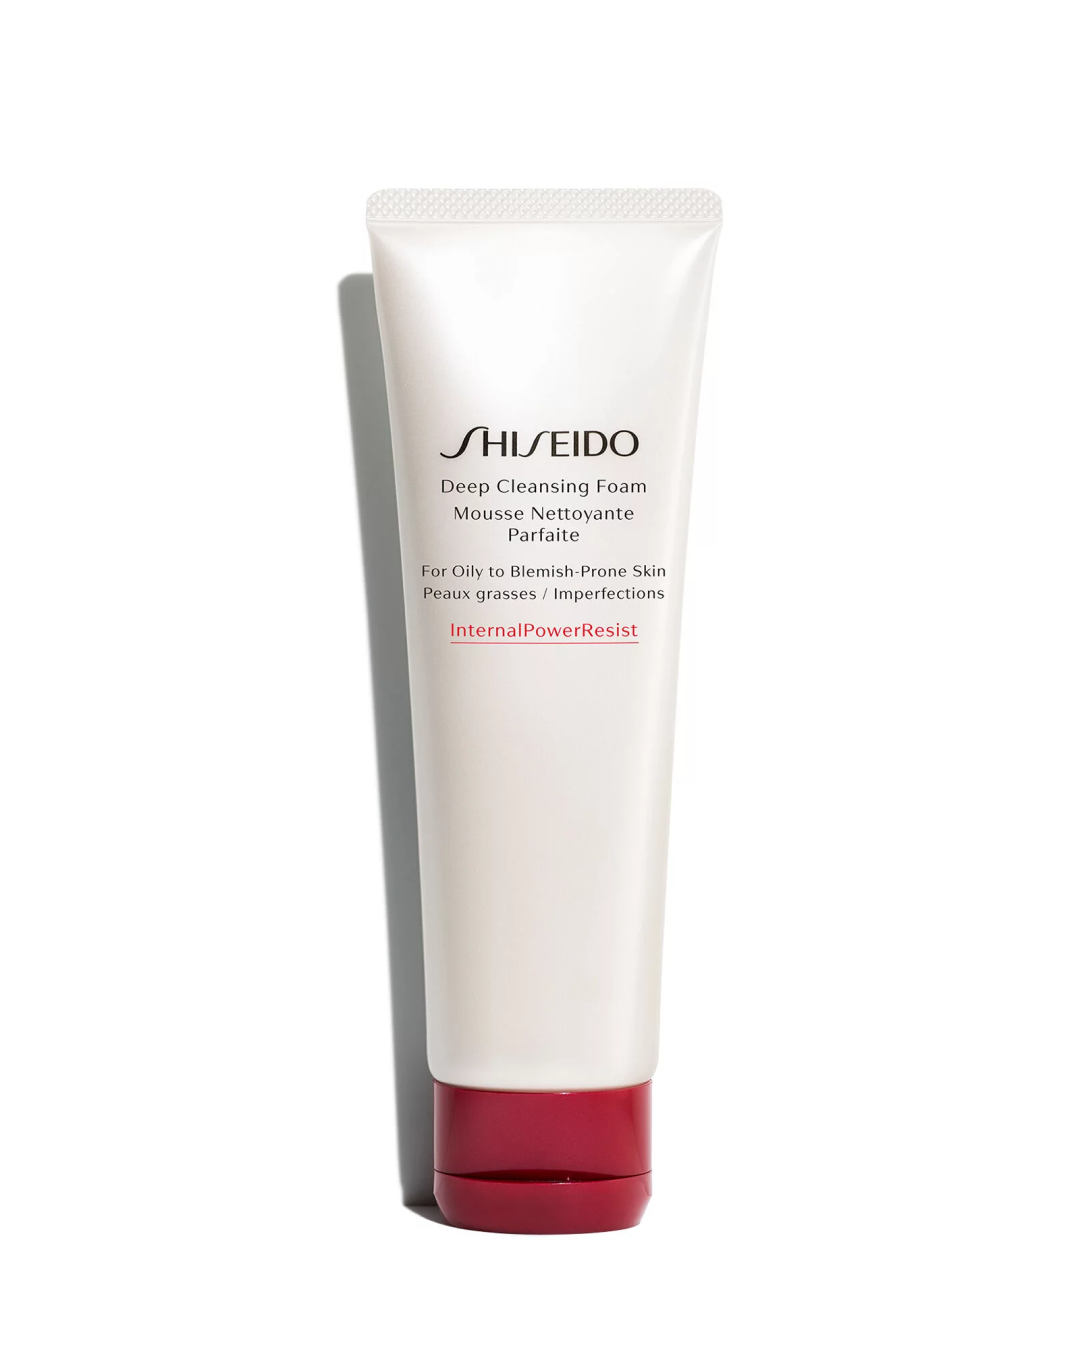 Shiseido Deep Cleansing Foam for Oily to Blemish-prone skin (125ml) - Best Buy World Philippines